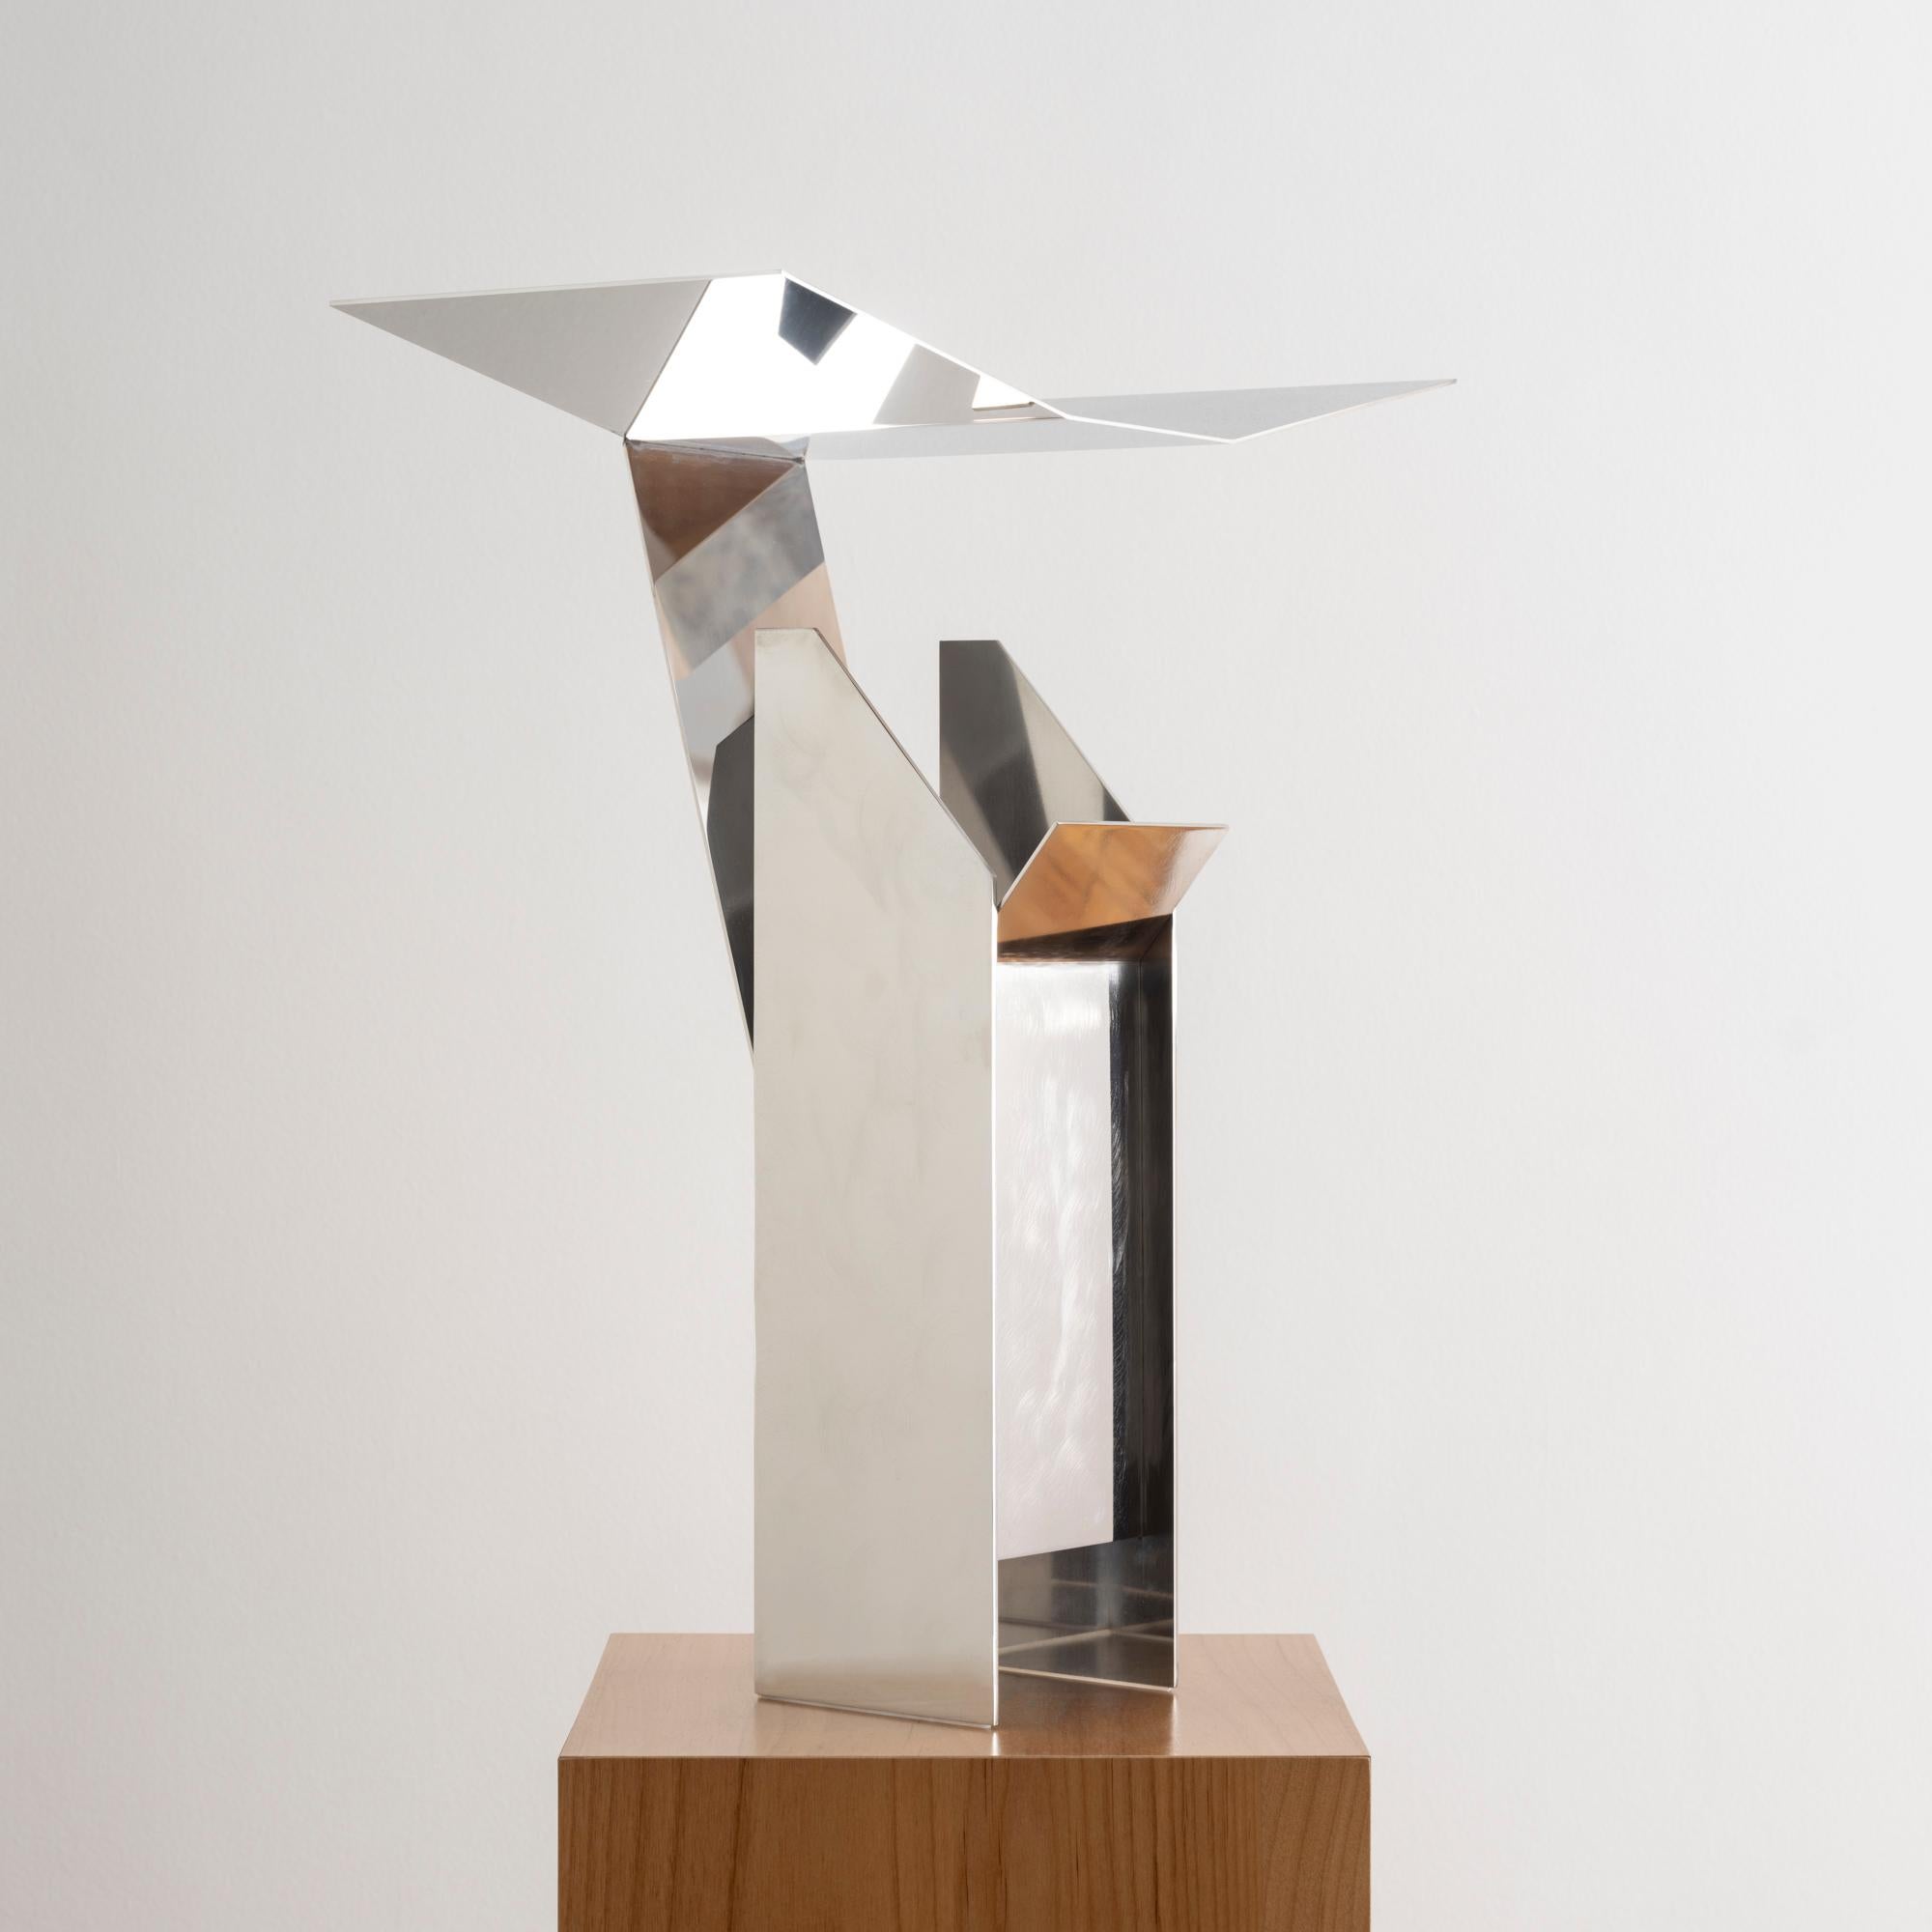 Designed by EJR Barnes in 2023, this contemporary stainless steel table lamp is sculpturally bent into an angular shape to artfully reflect and diffuse light beneath a folded metal canopy. 

Entitled 